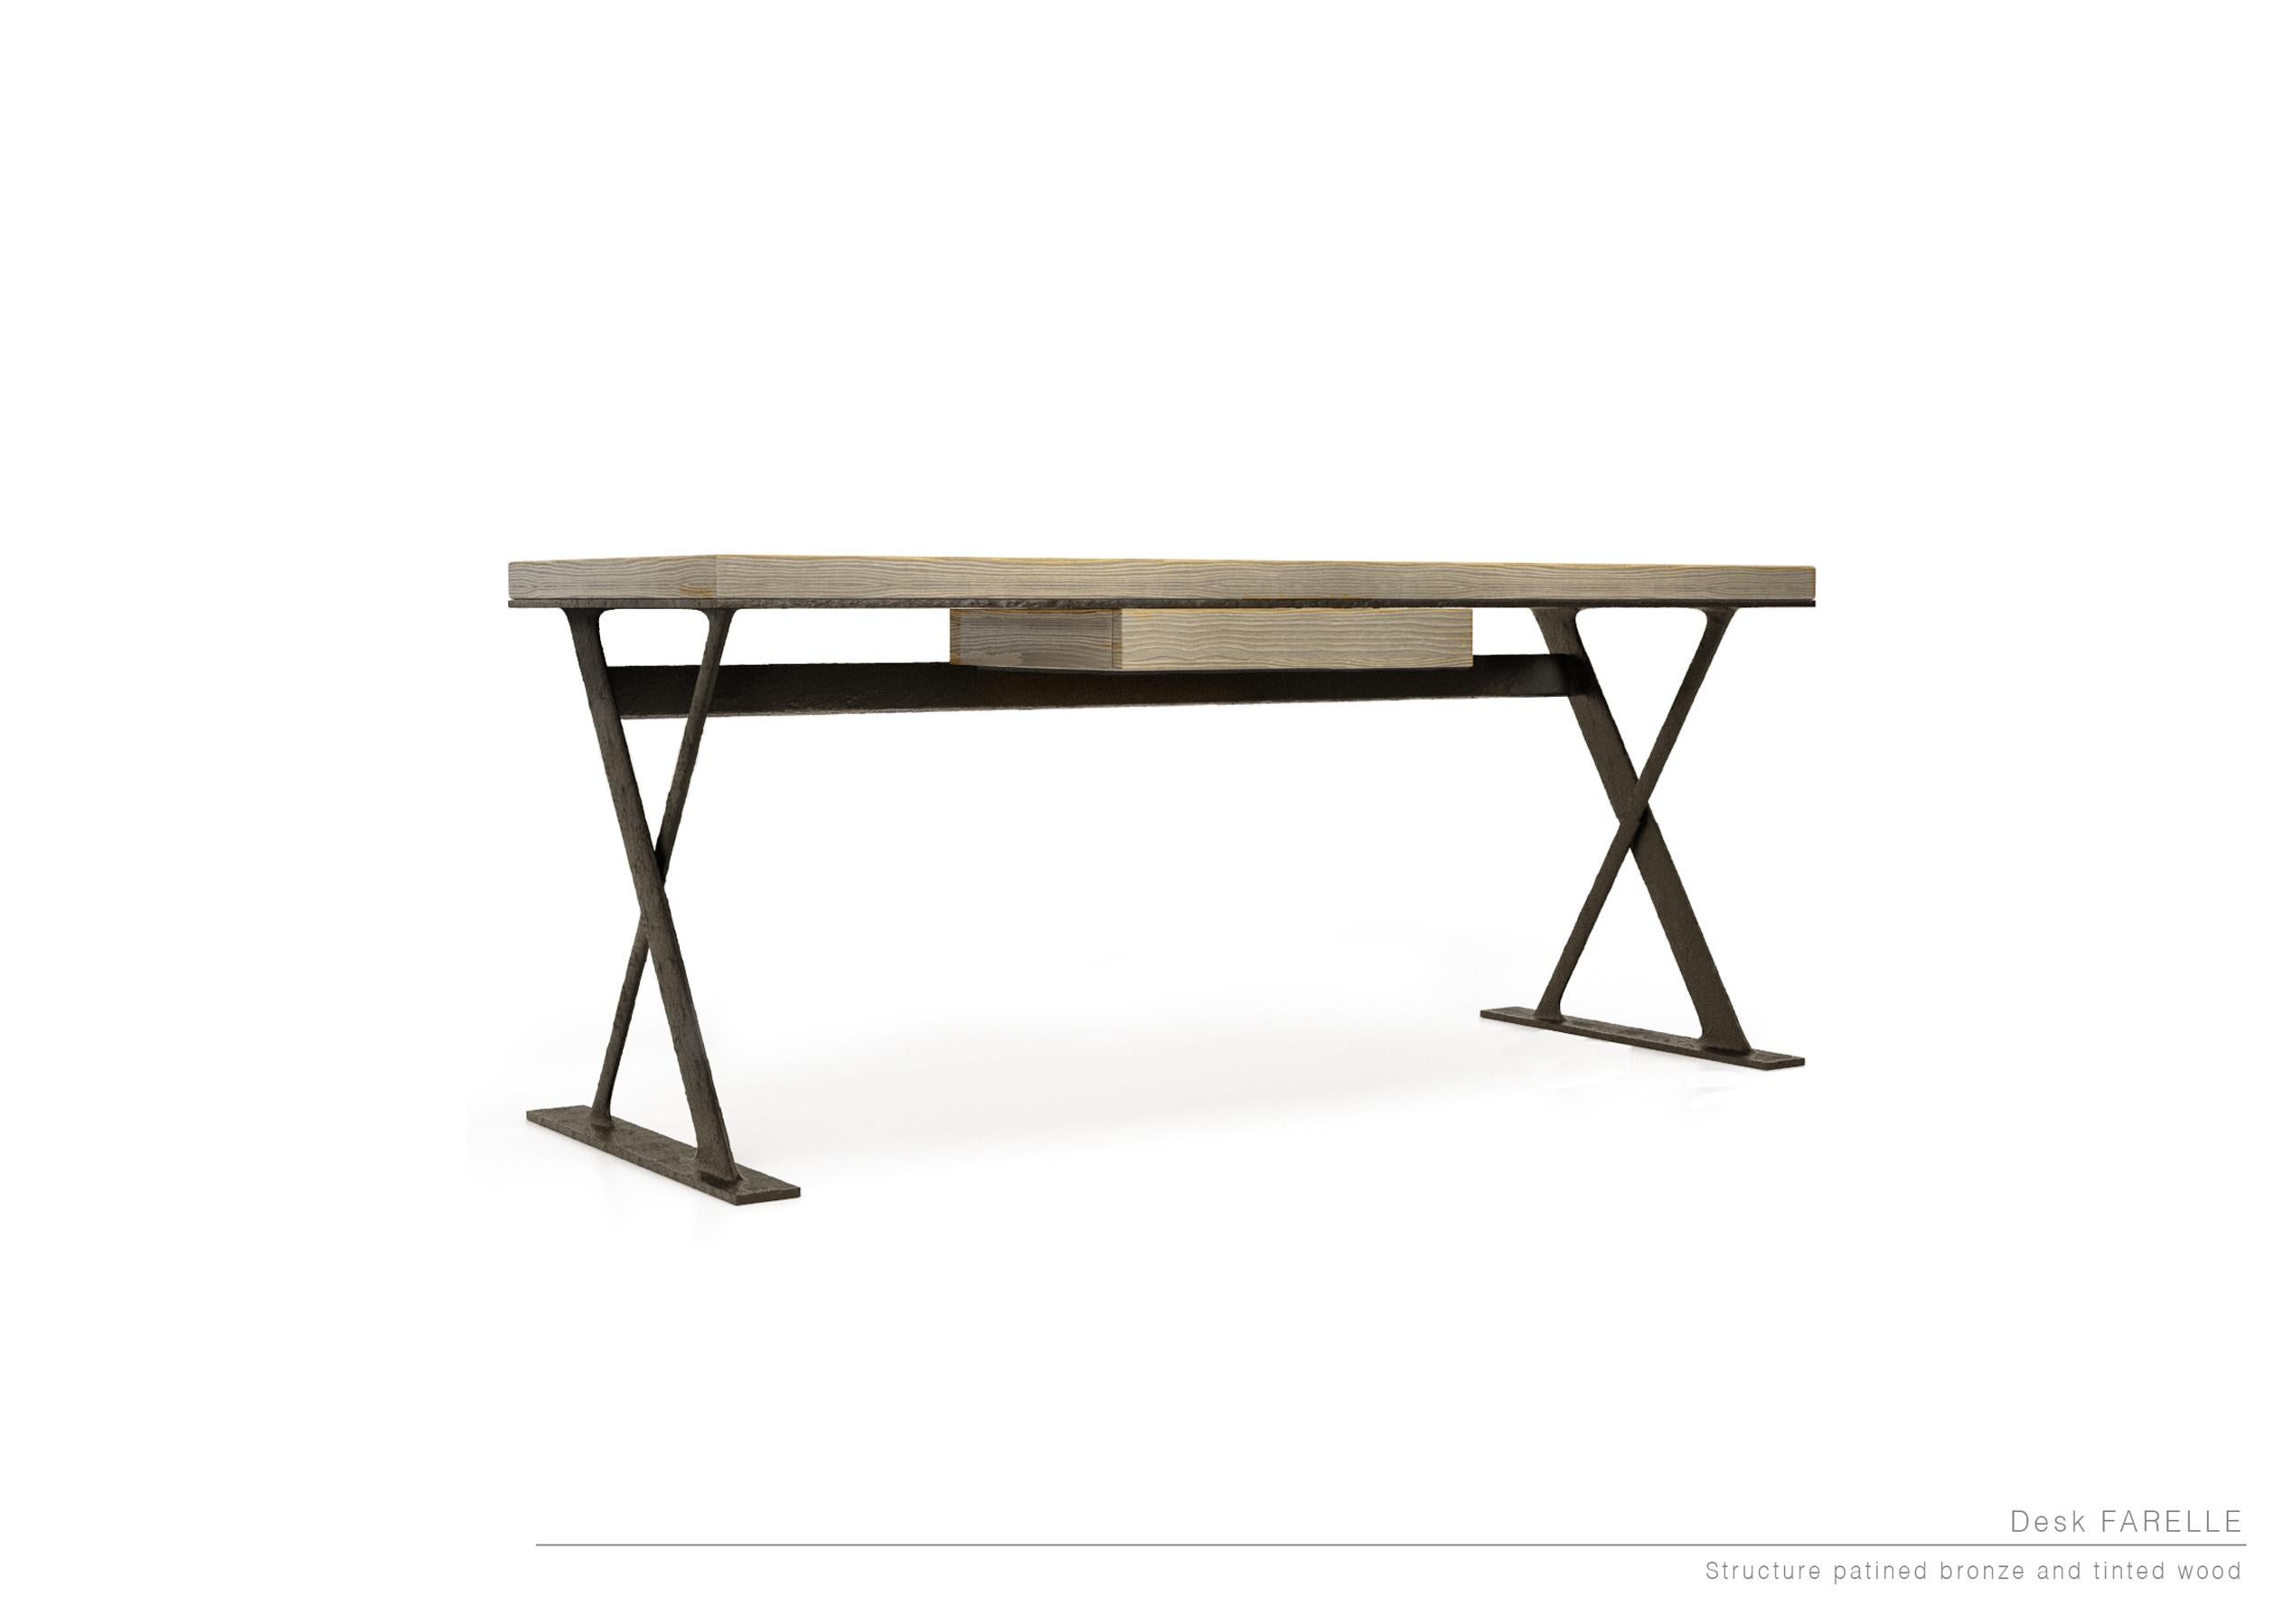 Farelle desk by LK Edition
Dimensions: 180 x 110 x H 40 cm
Materials: Oak and patinated Bronze base. 

It is with the sense of detail and requirement, this research of the exception by the selection of noble materials and his culture of the